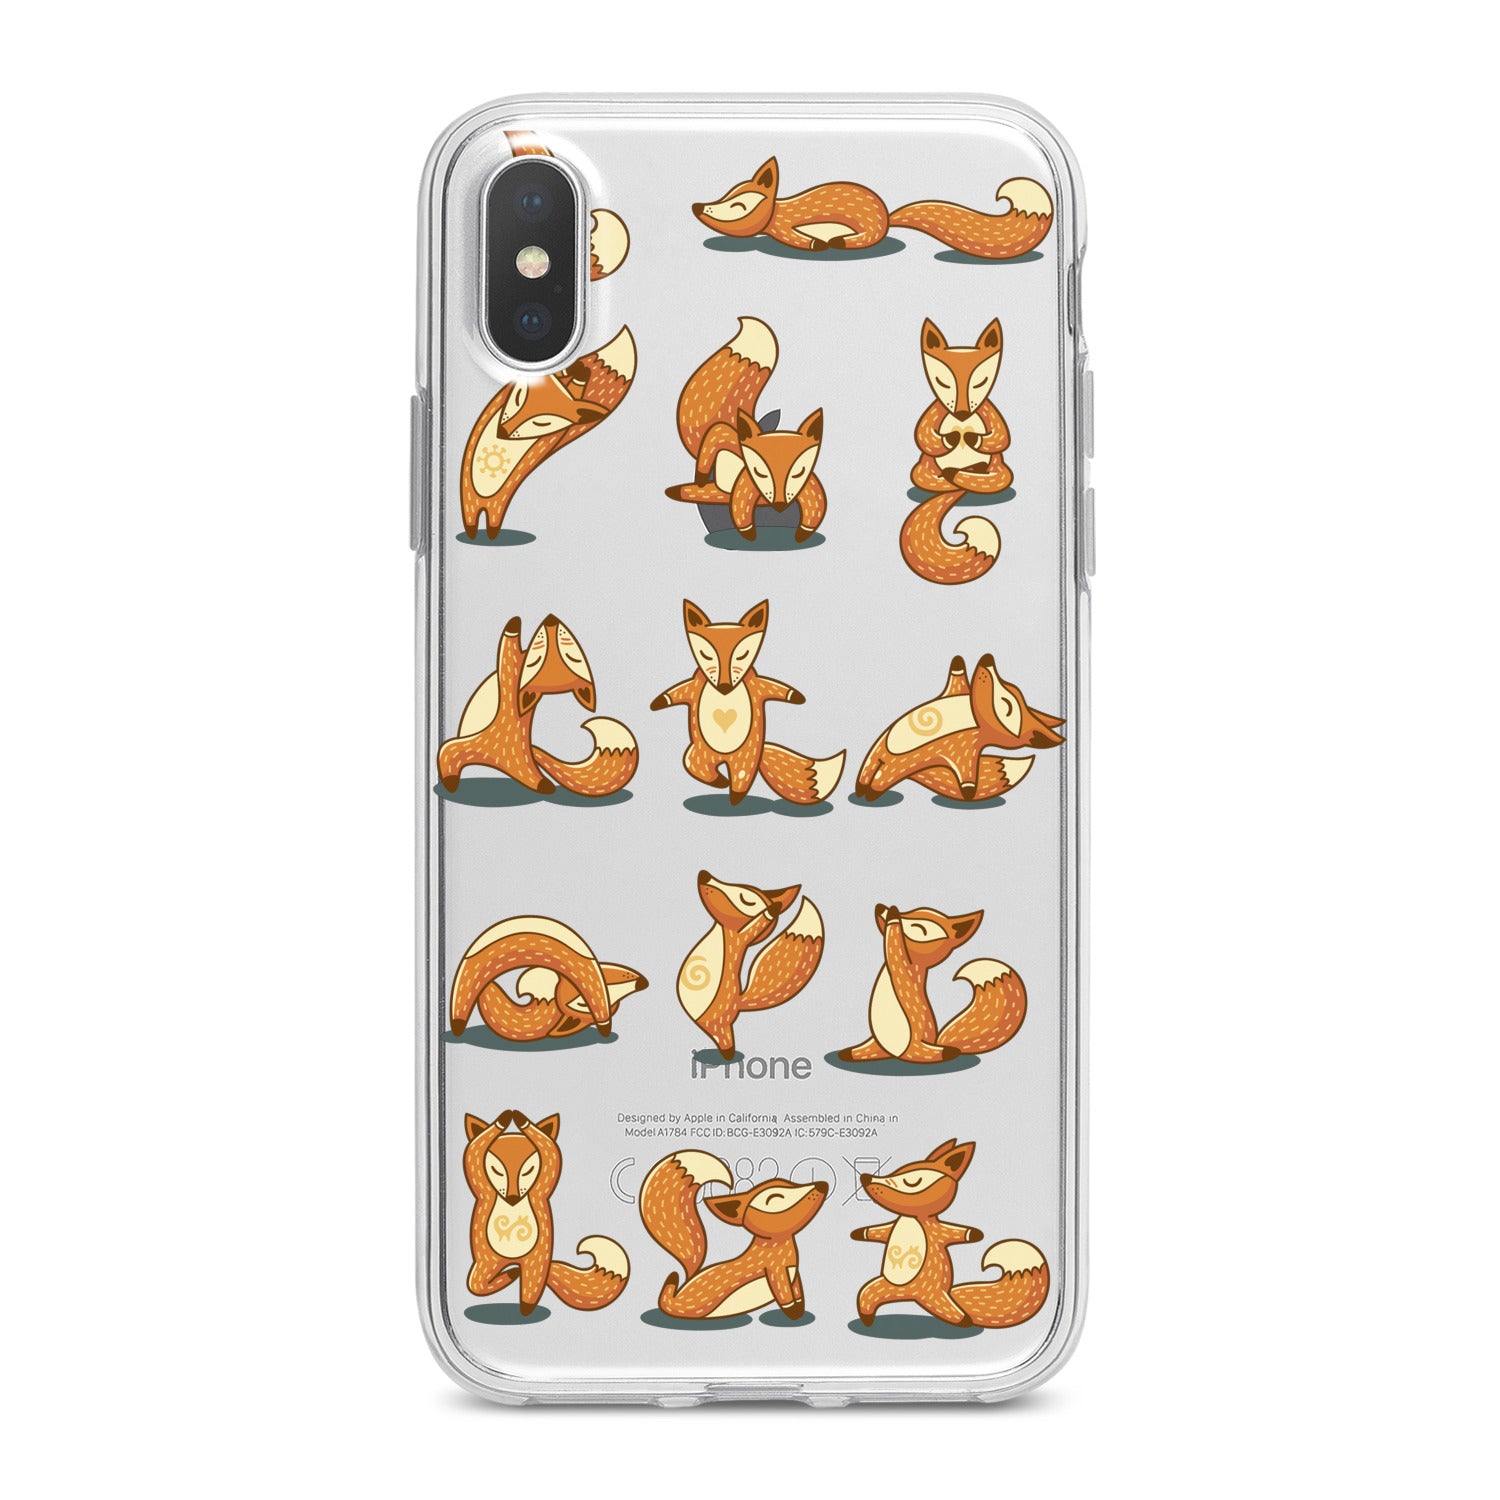 Lex Altern Yoga Fox Phone Case for your iPhone & Android phone.